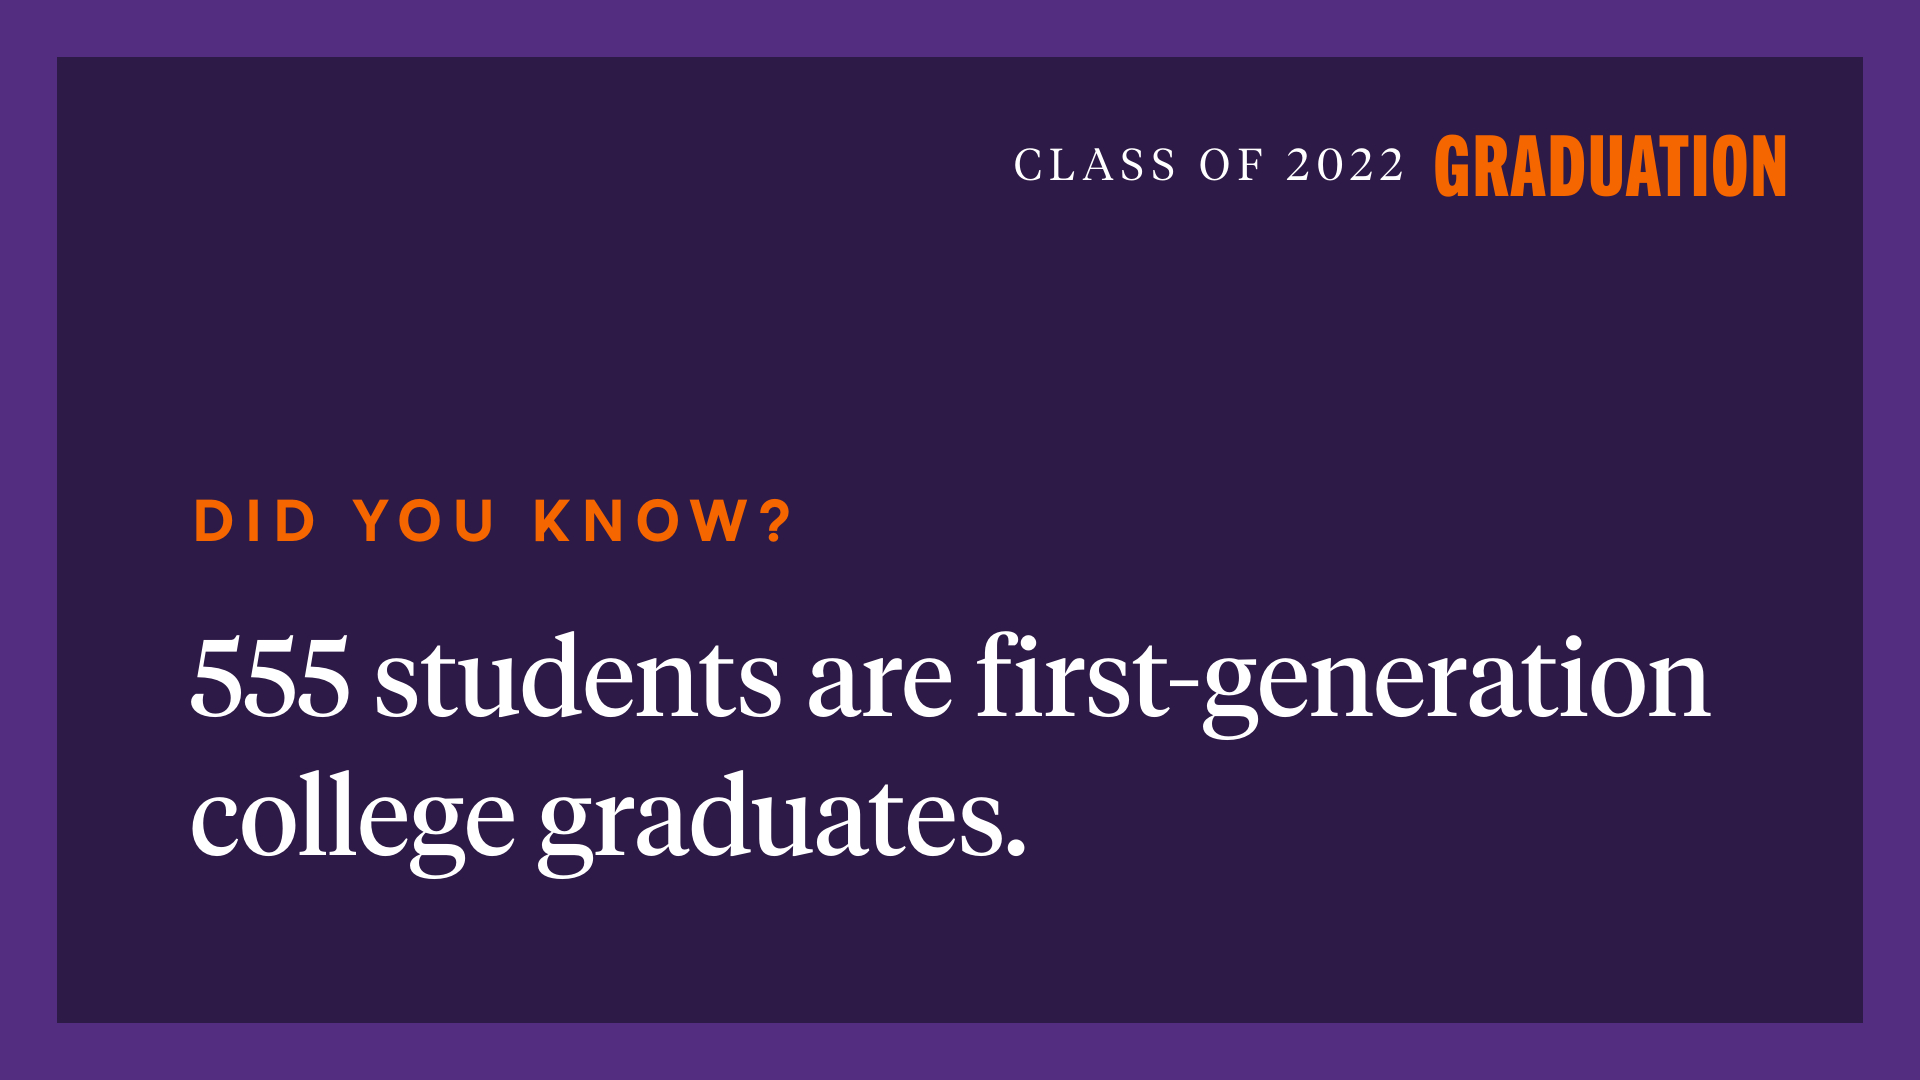 Class of 2022 Graduation: Did you know? 555 students are first-generation college graduates.